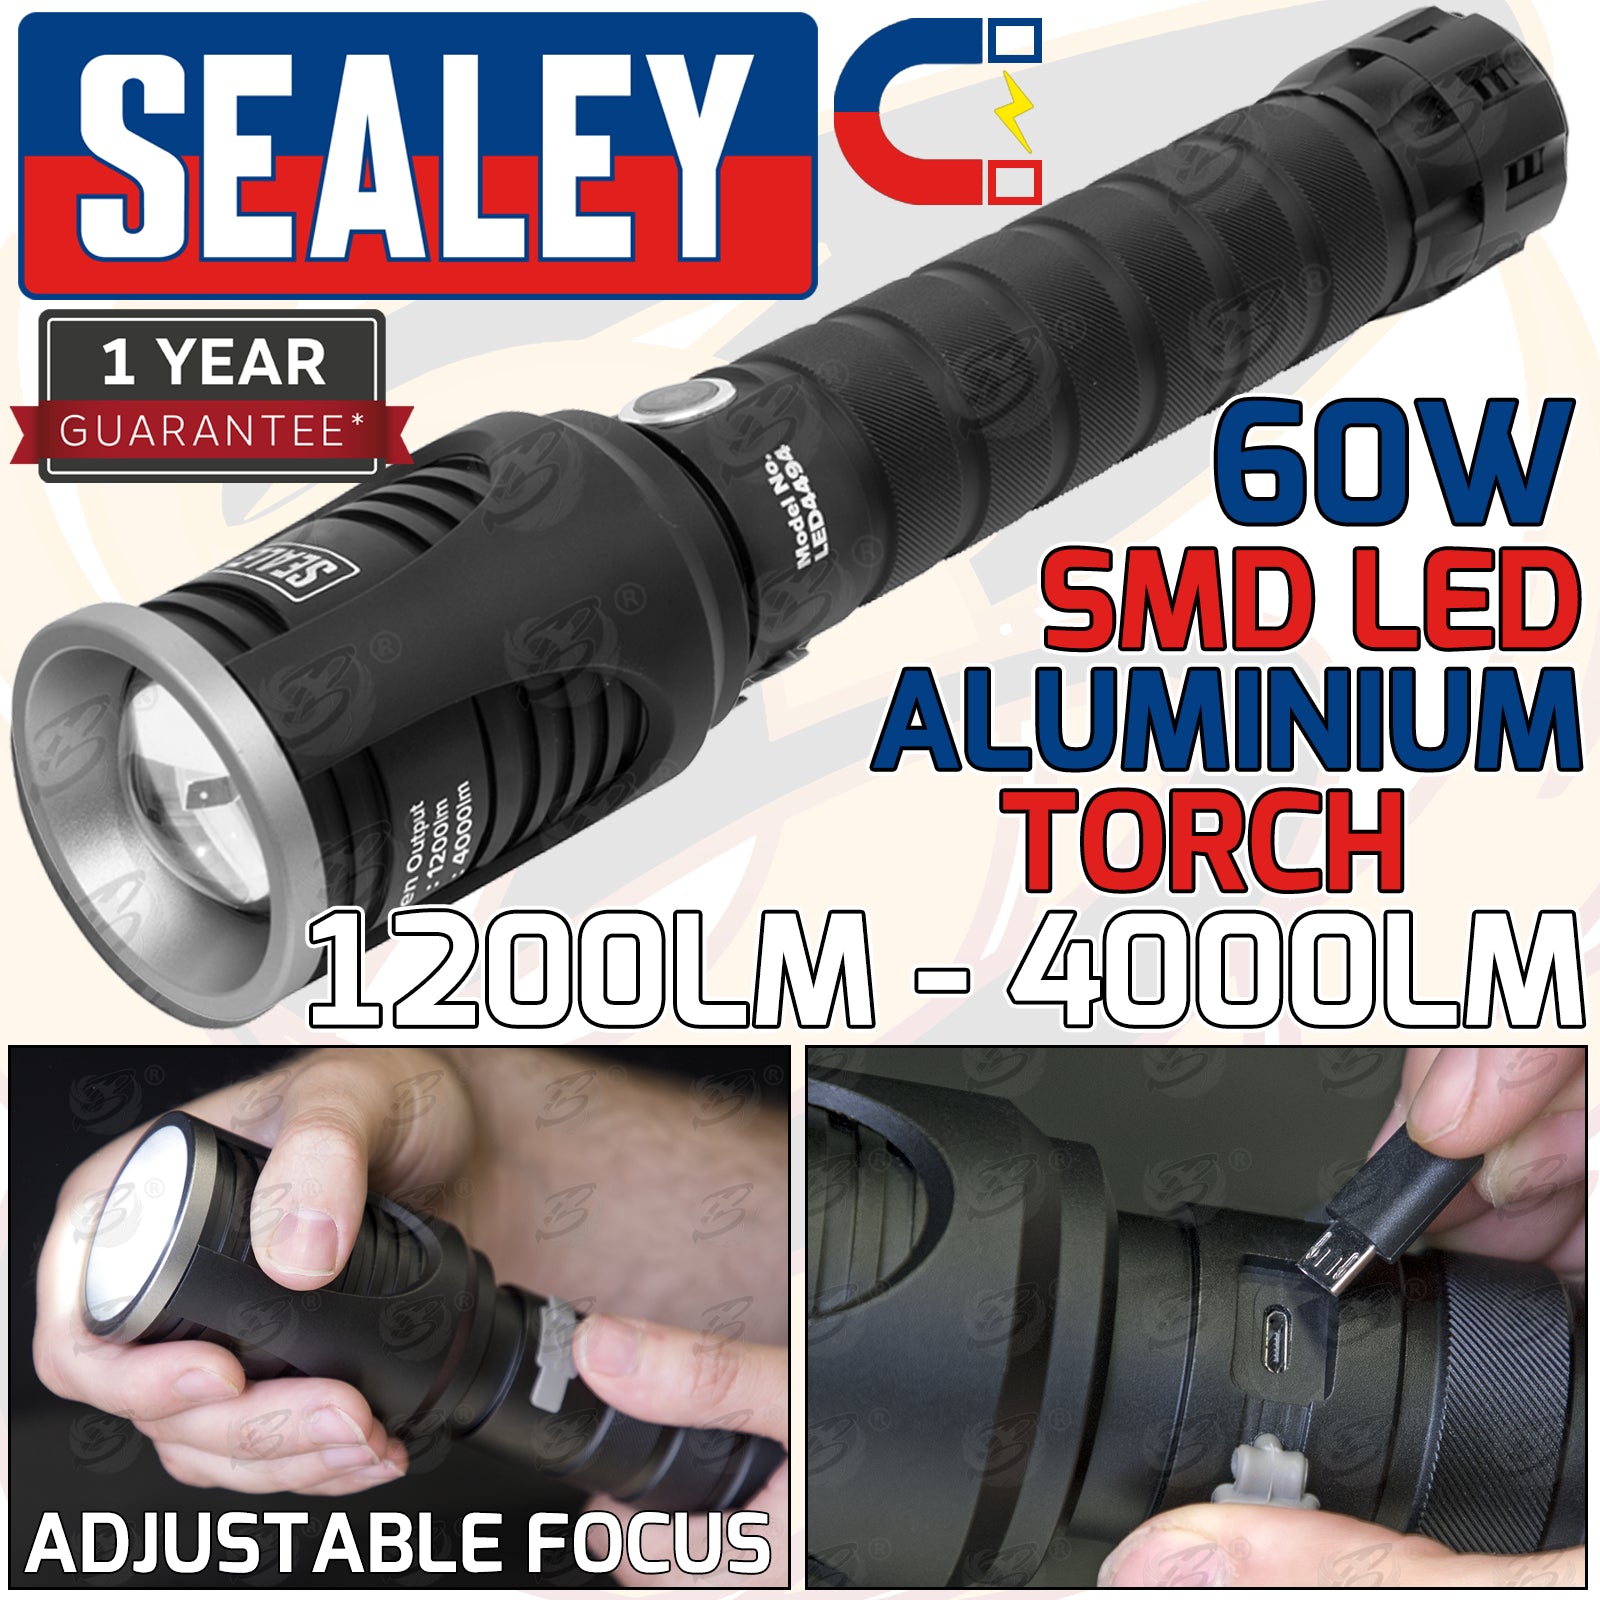 SEALEY RECHARGEABLE LI - ION SMD LED TORCH 60W 1200LM - 4000LM